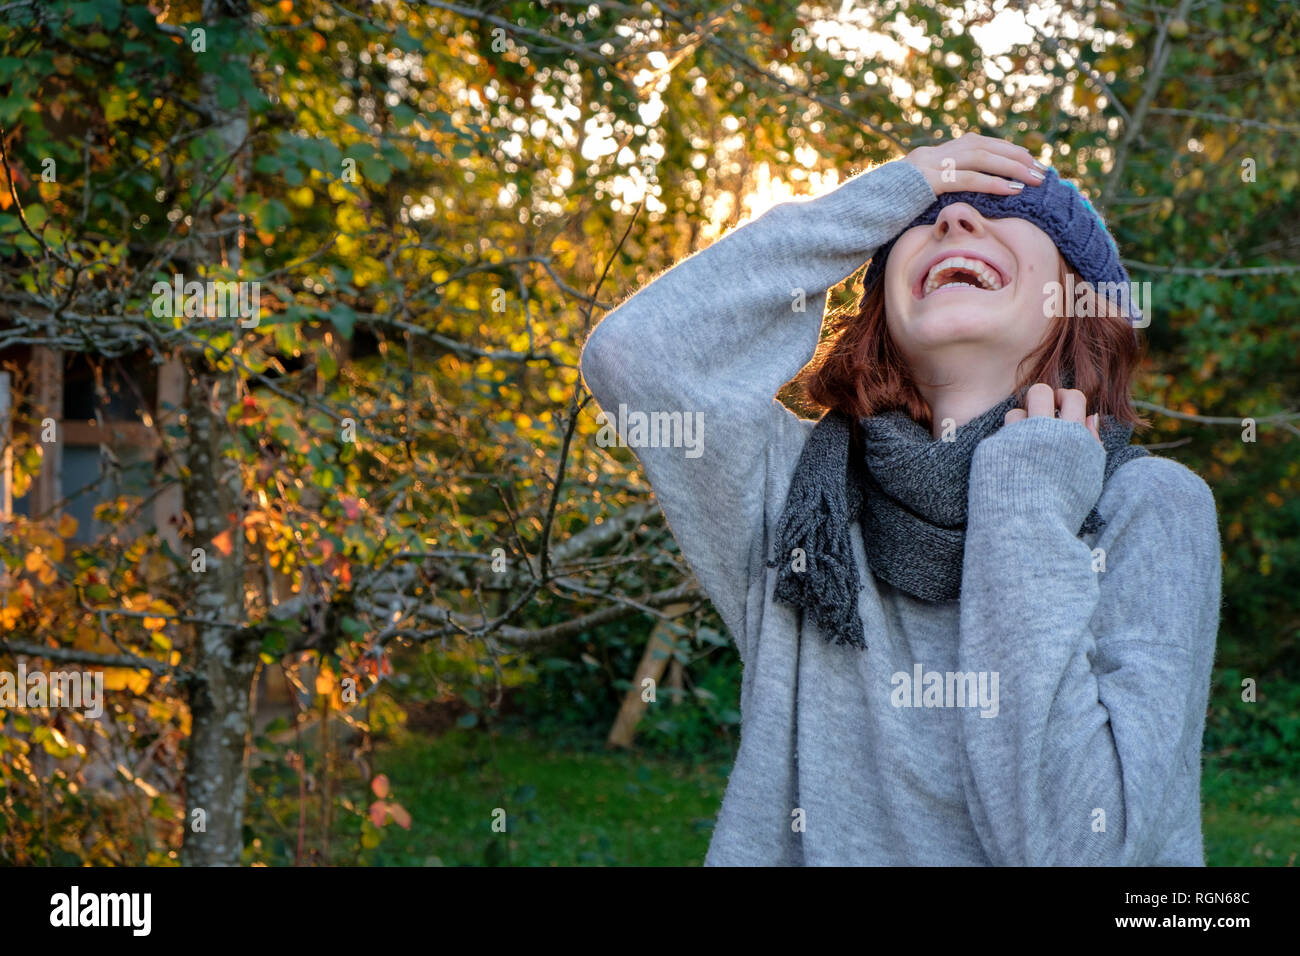 Laughing teenage girl wearing wooly hat and scarf in autumn Stock Photo